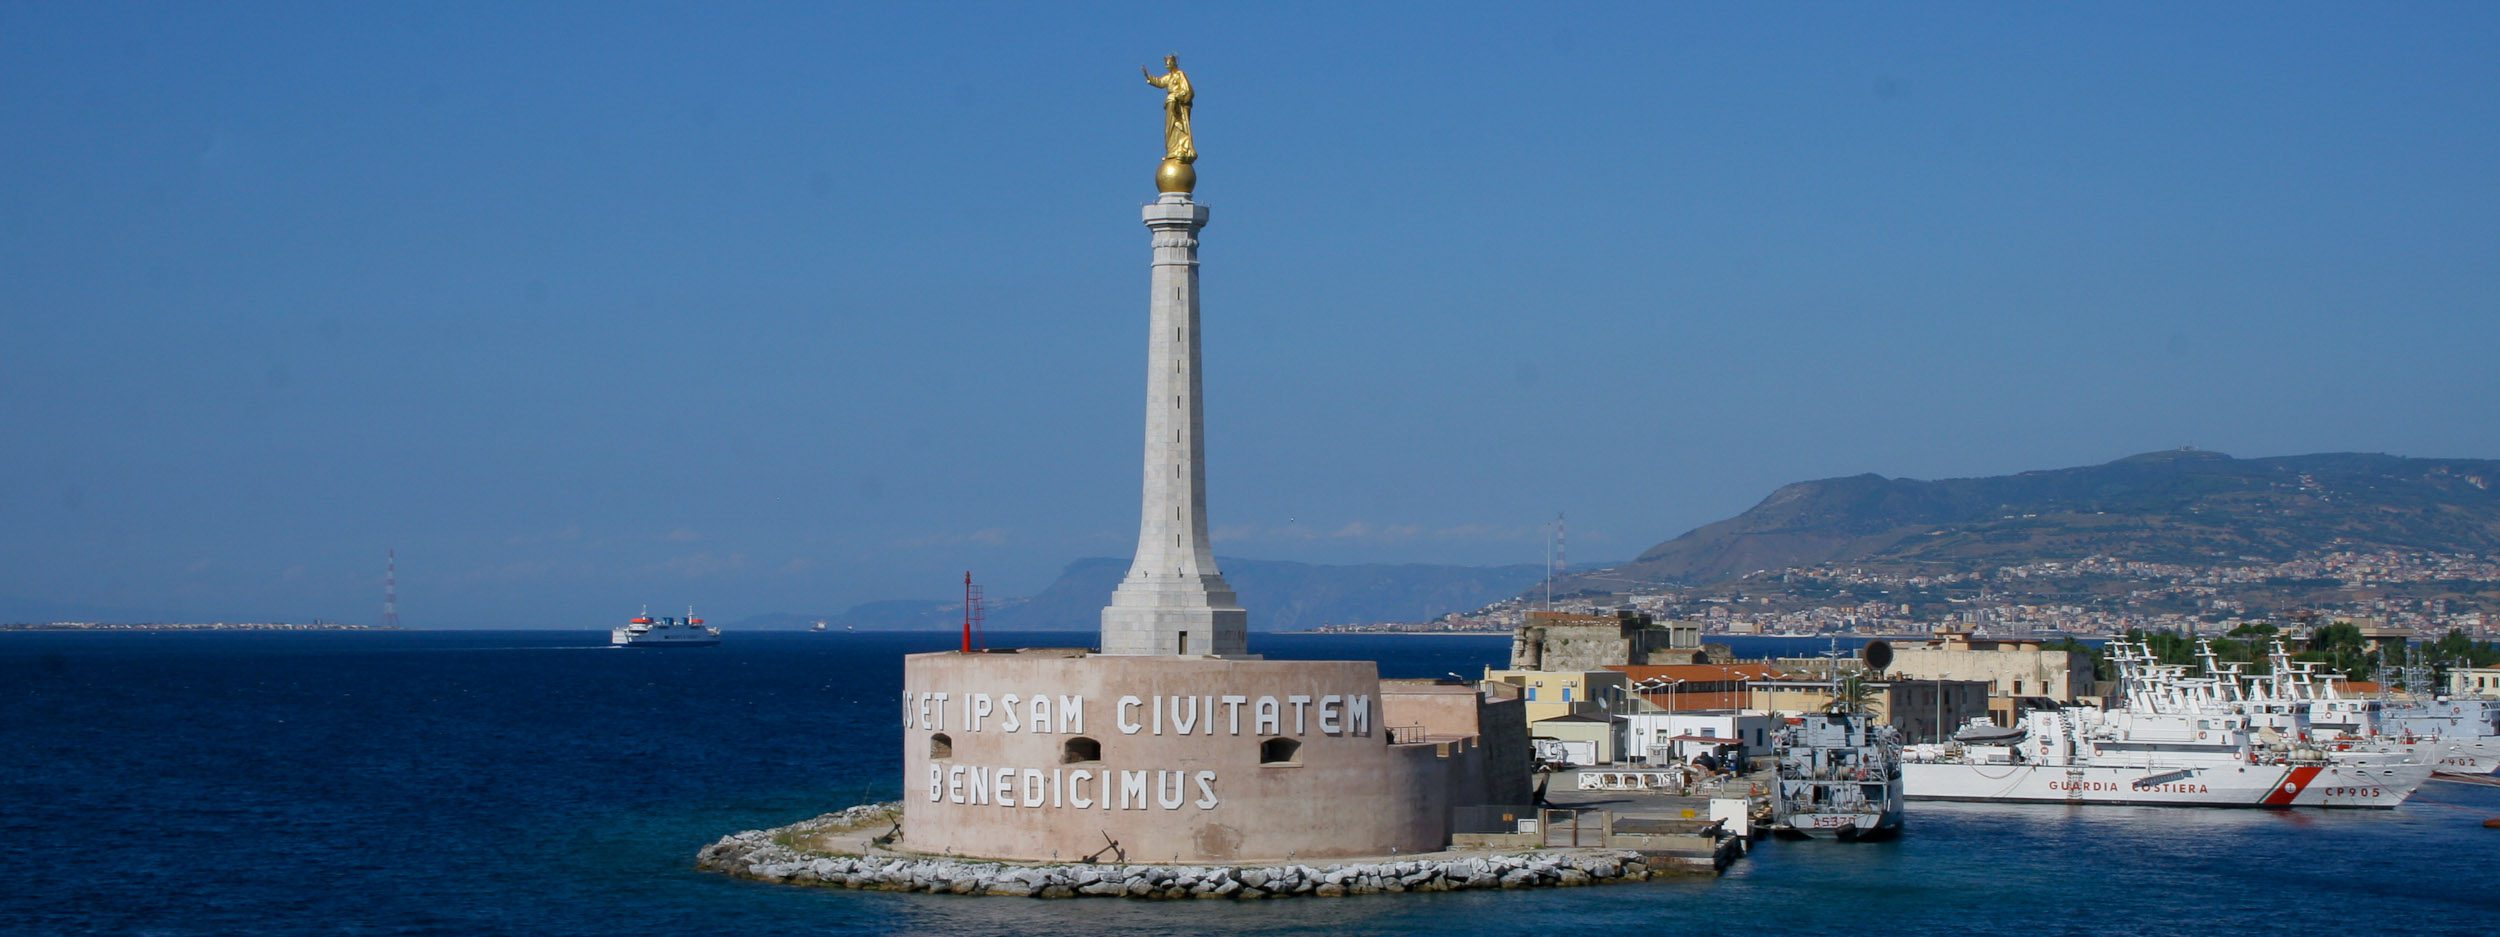 Messina Port and the Blessing of a Golden Madonnina - italian notes